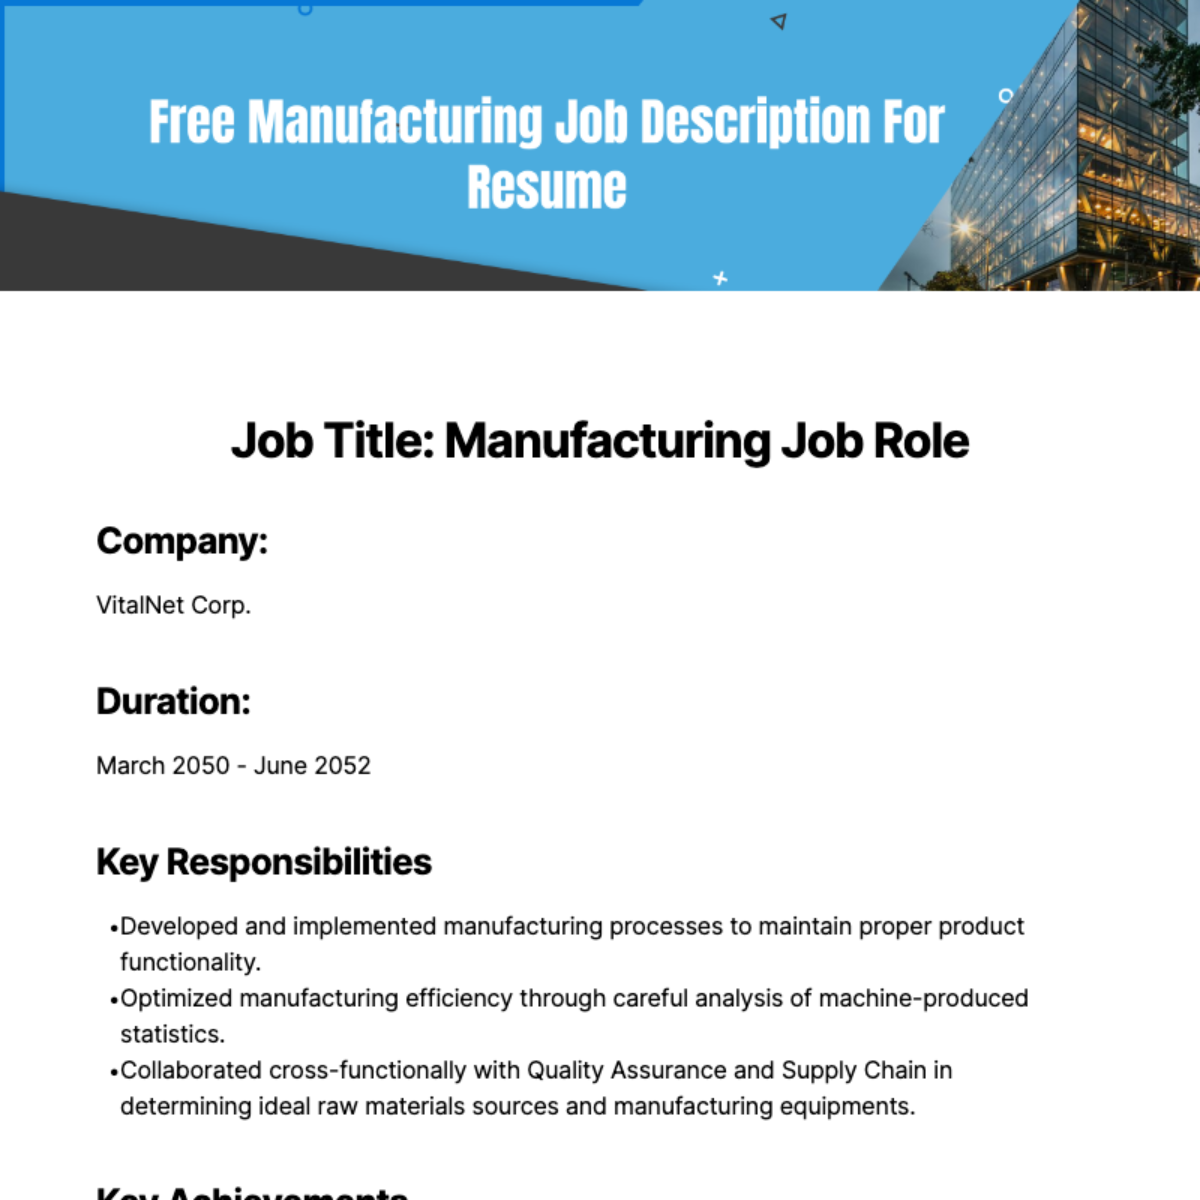 Free Manufacturing Job Description For Resume Template